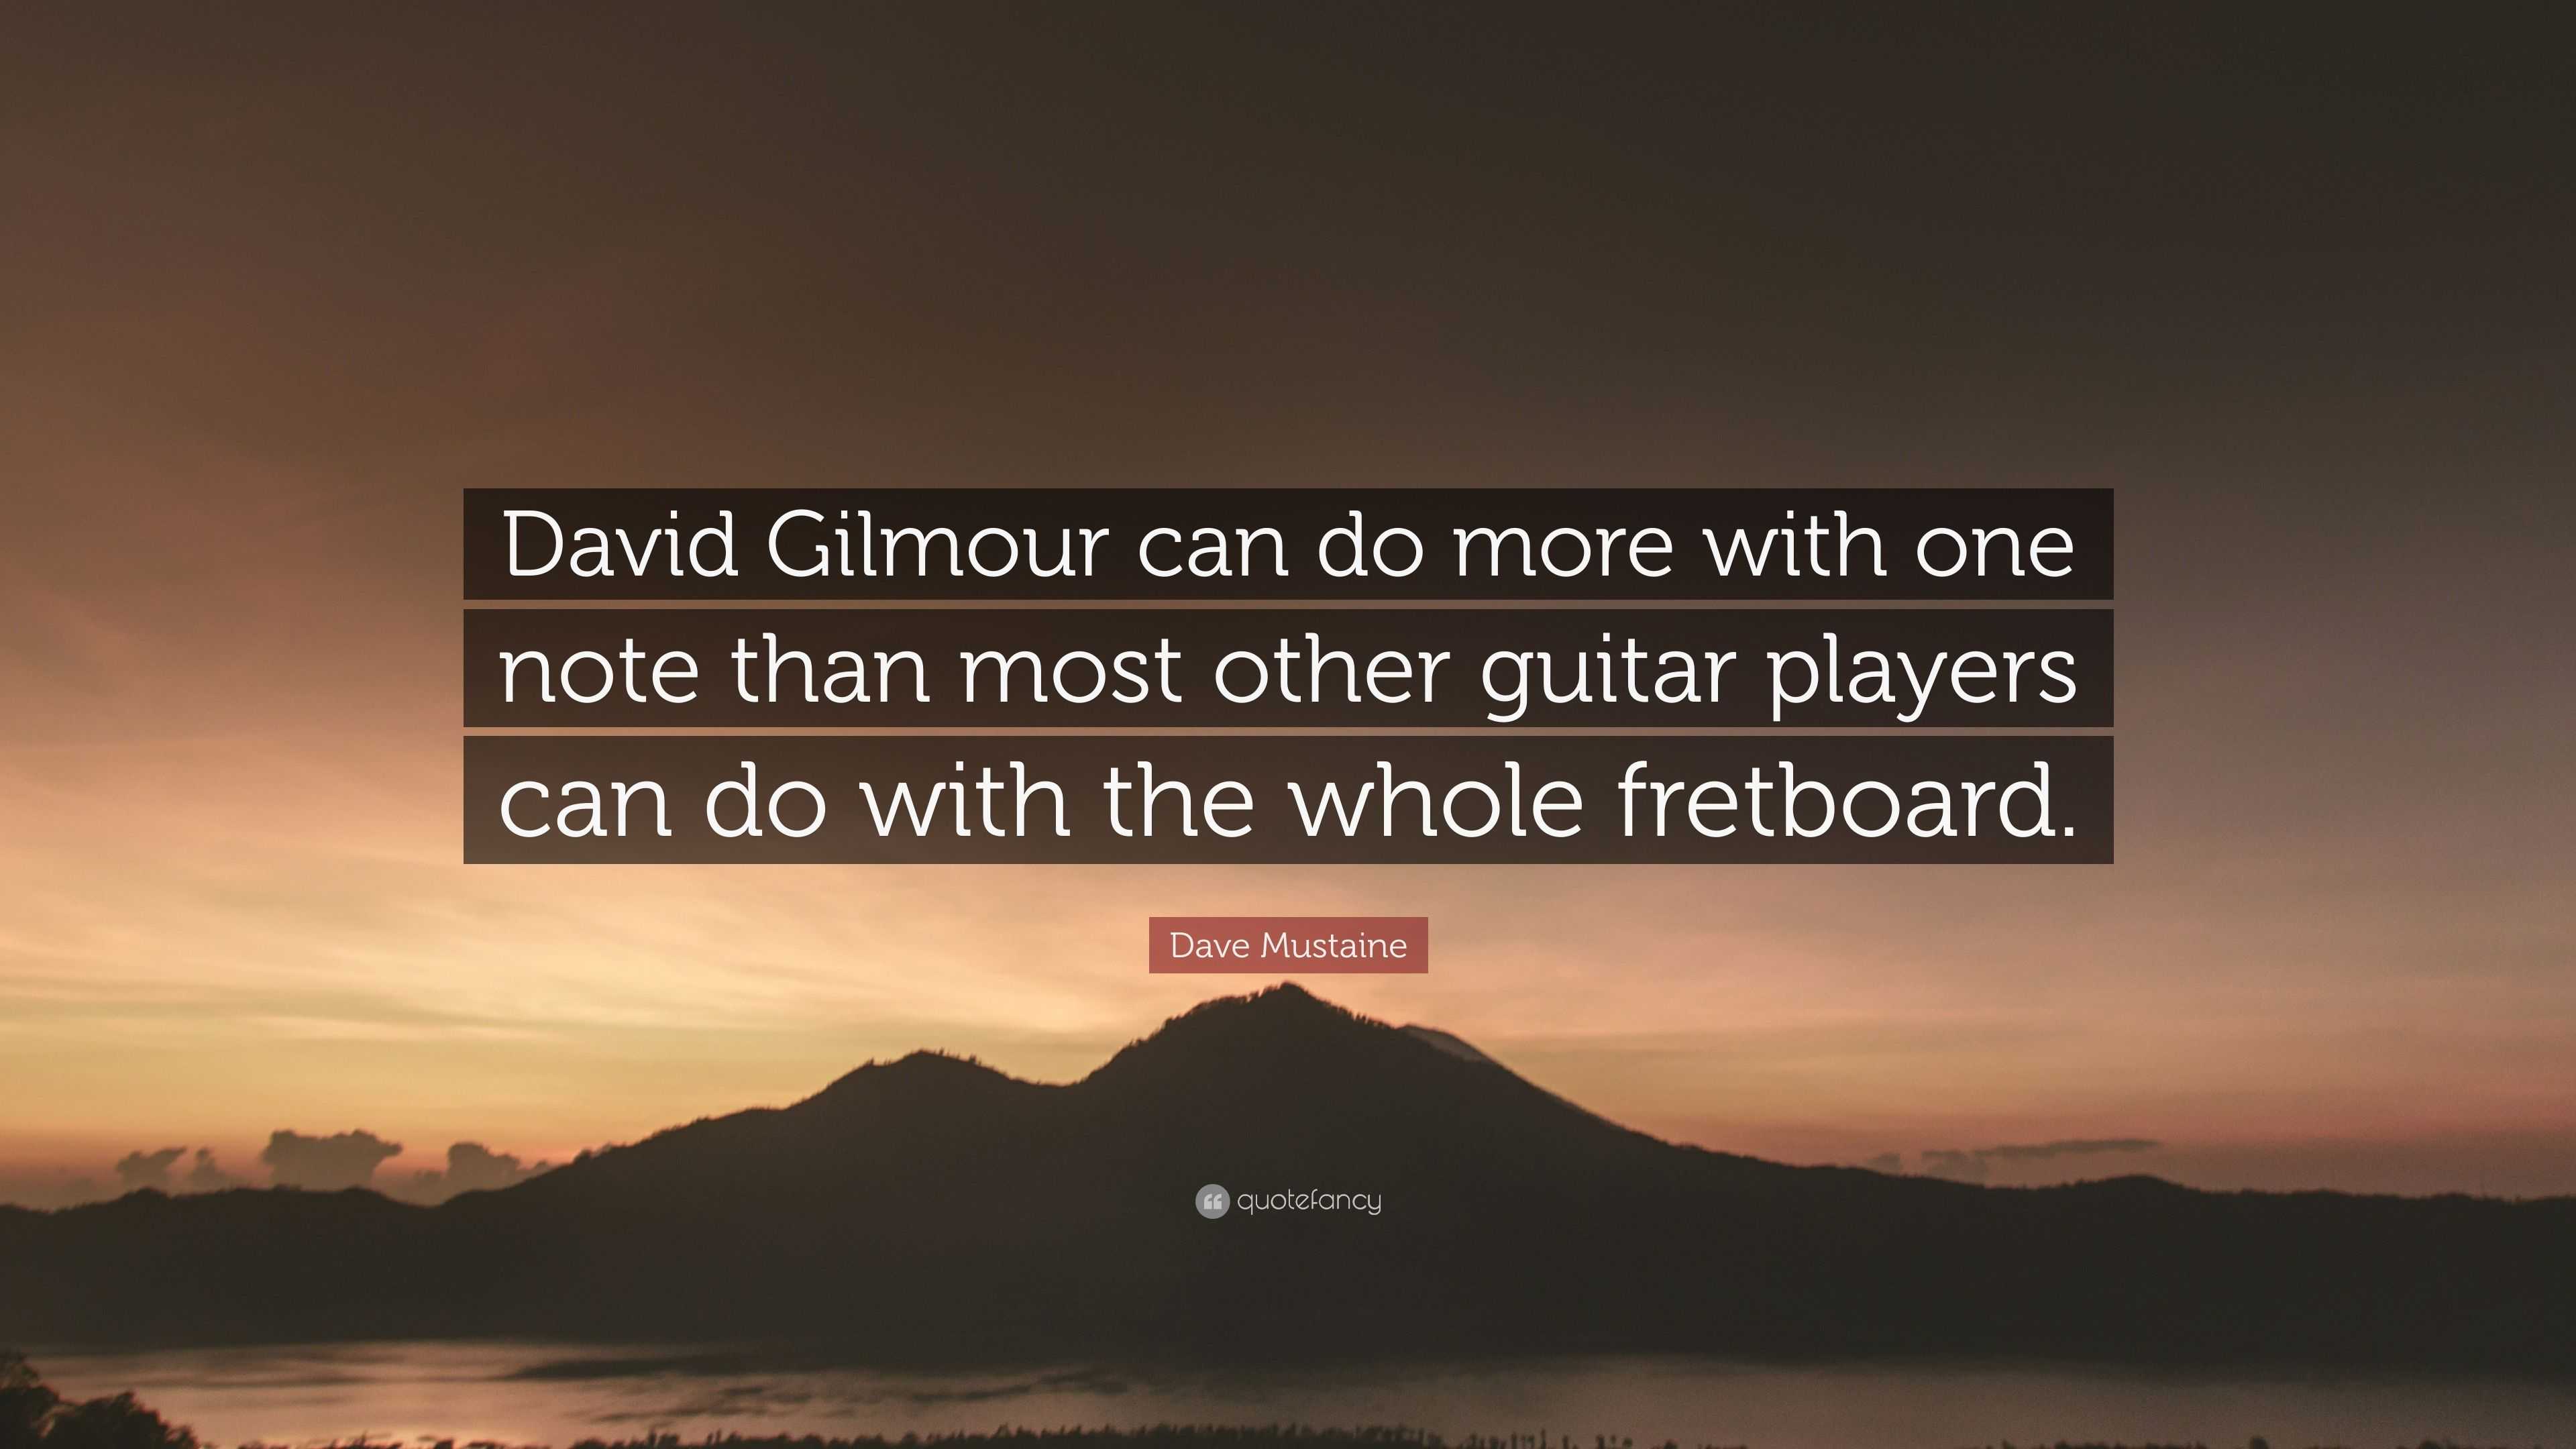 Dave Mustaine Quote: “David Gilmour can do more with one note than most  other guitar players